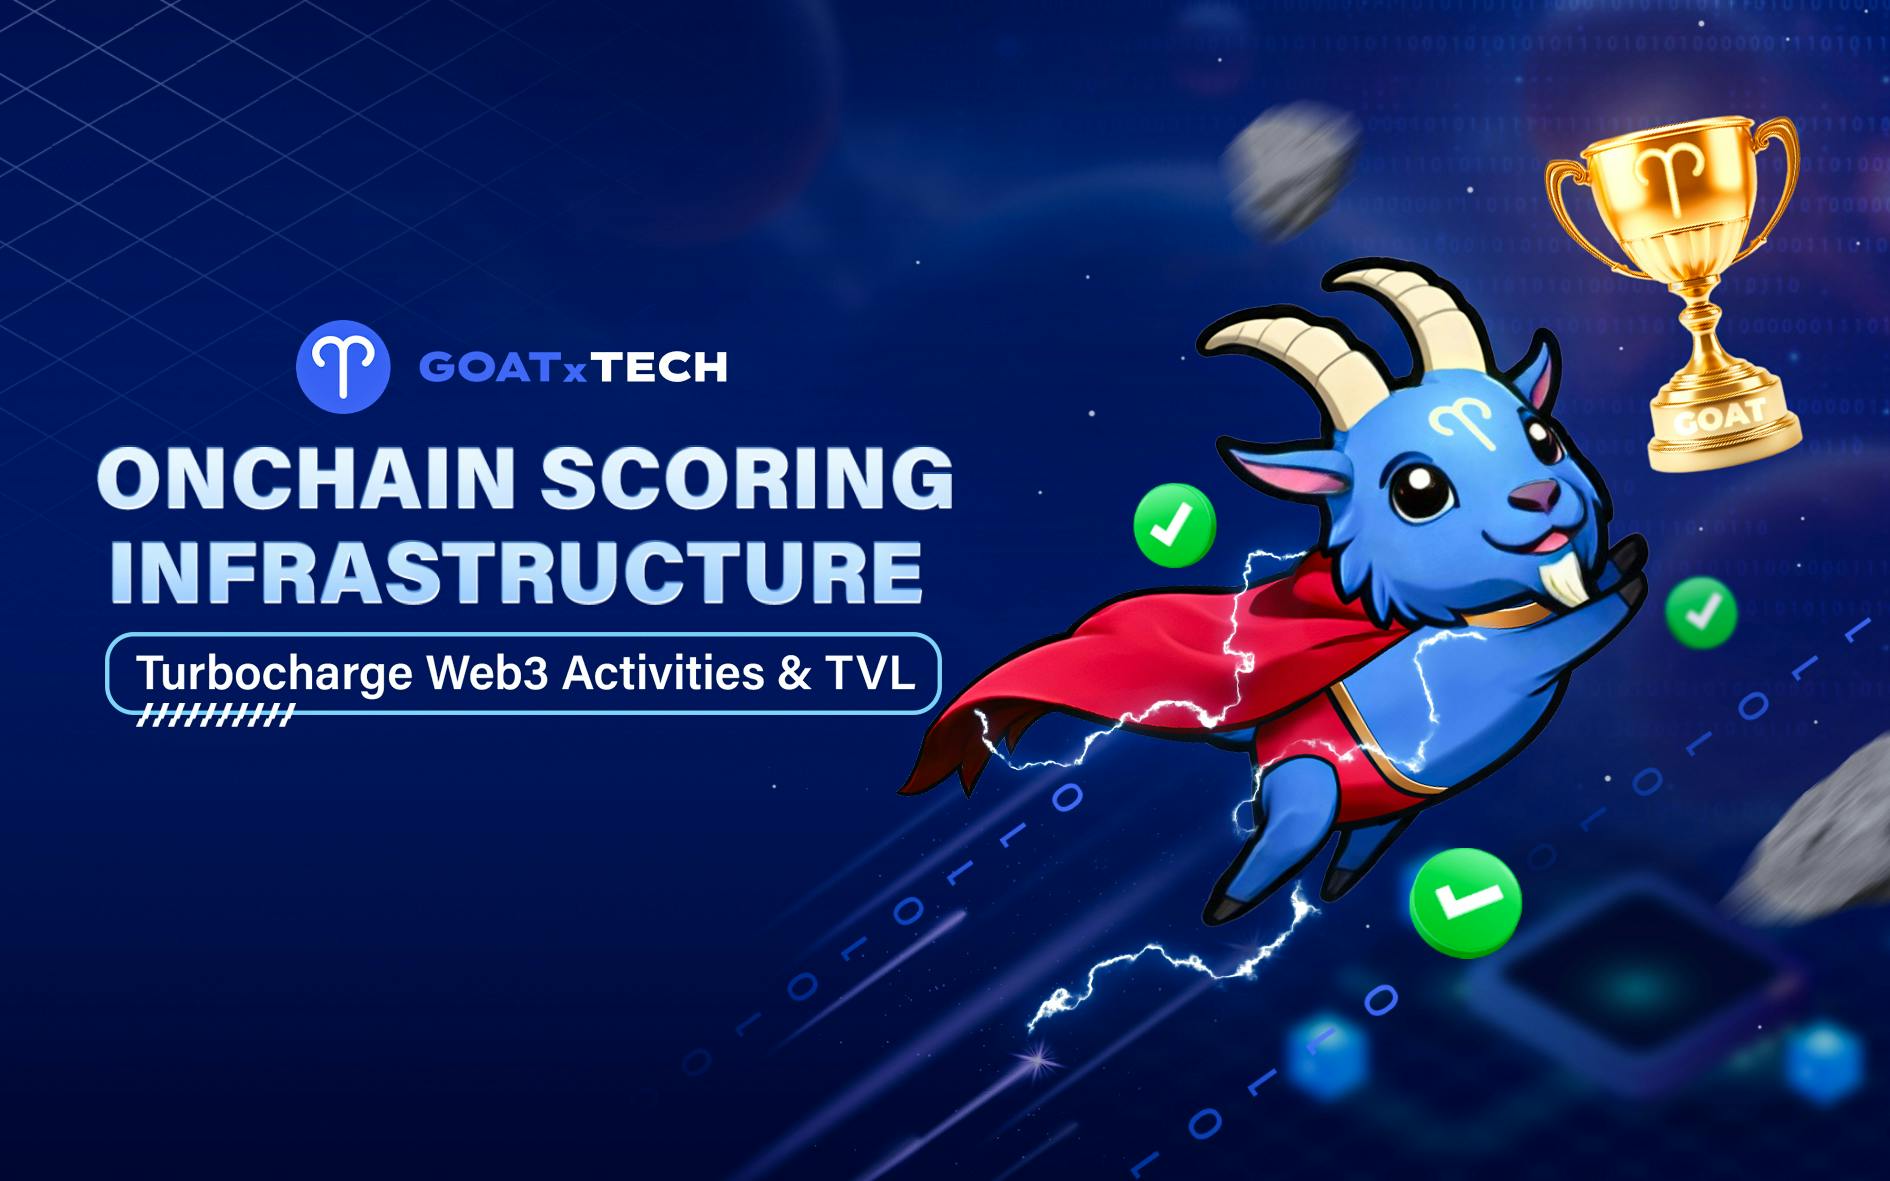 Goat.Tech evolves to become the First Onchain Scoring Infrastructure 